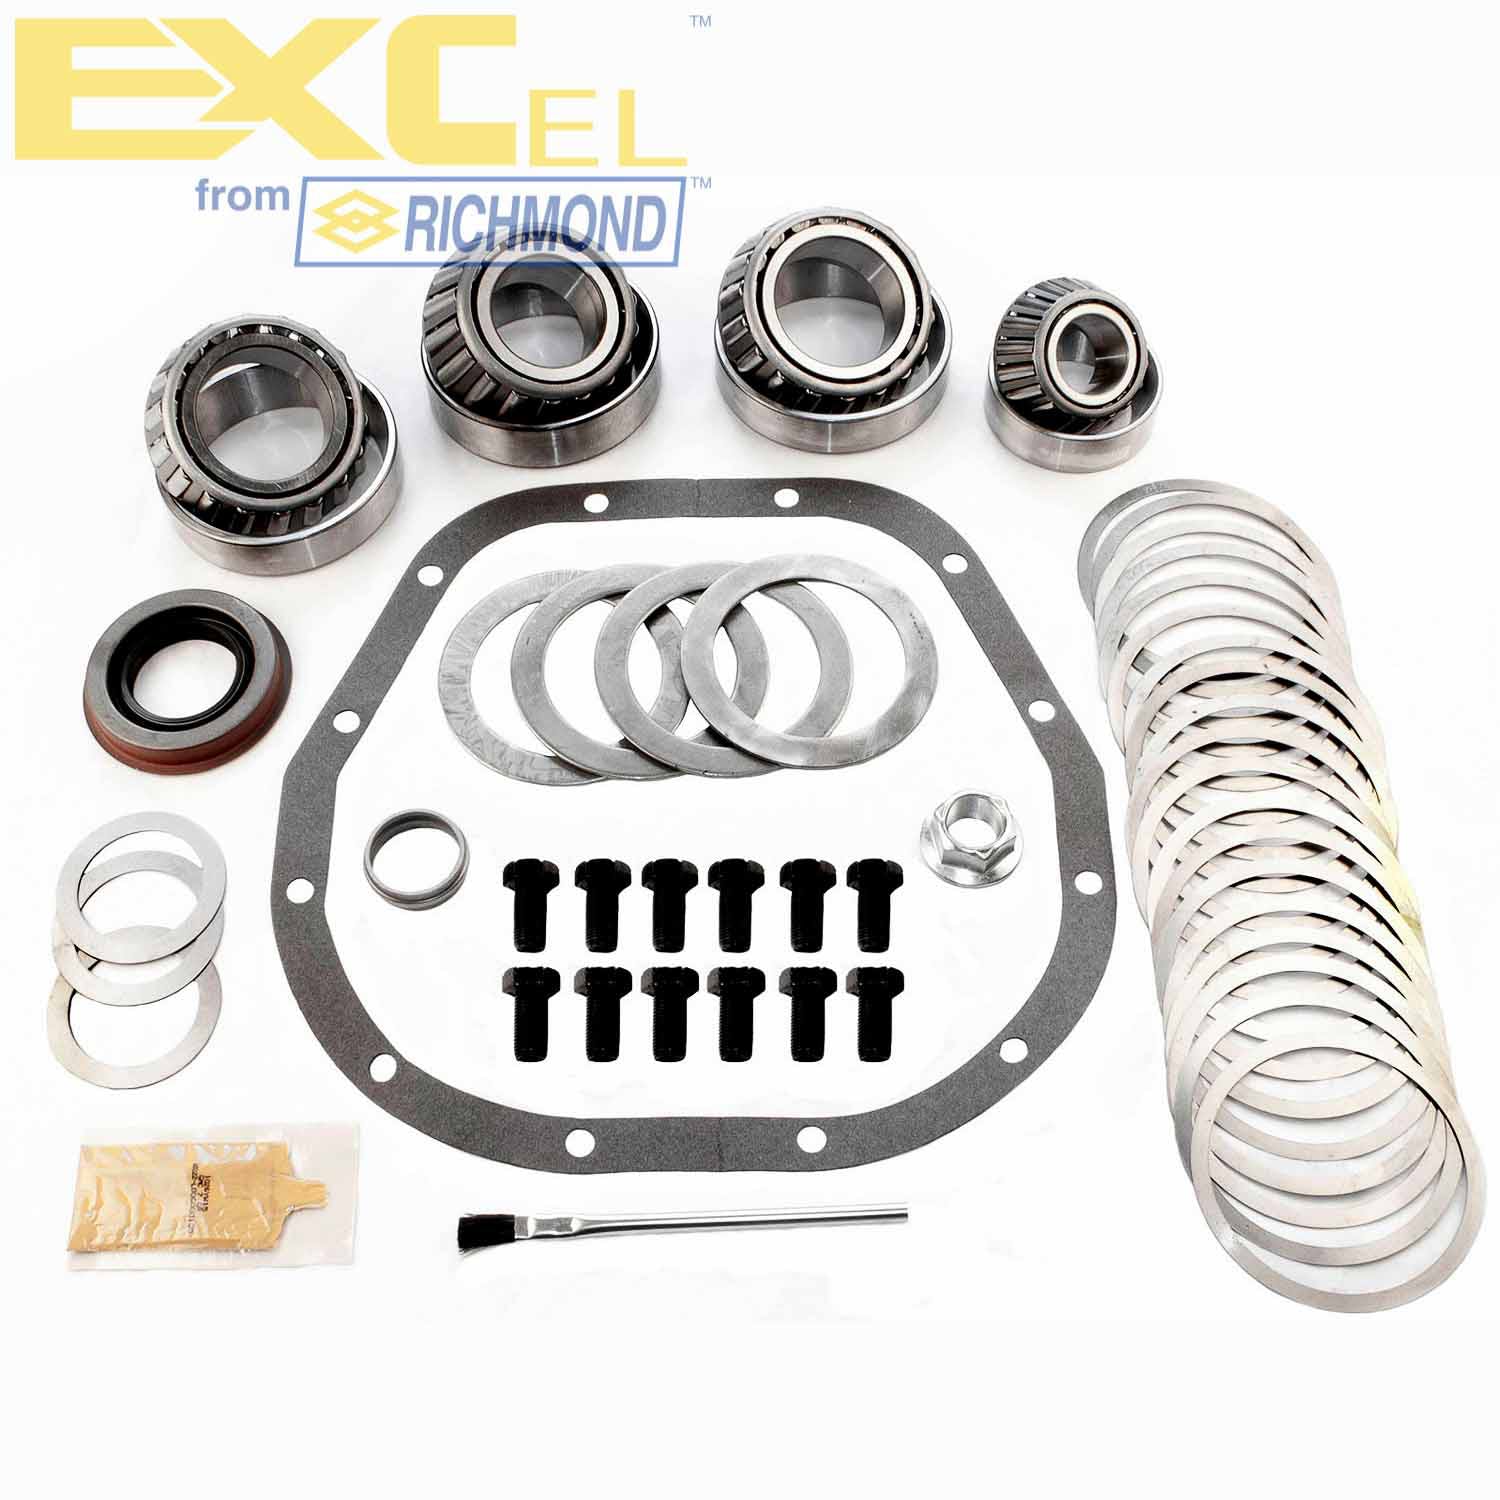 Excel XL-1059-1 Differential Bearing Kit